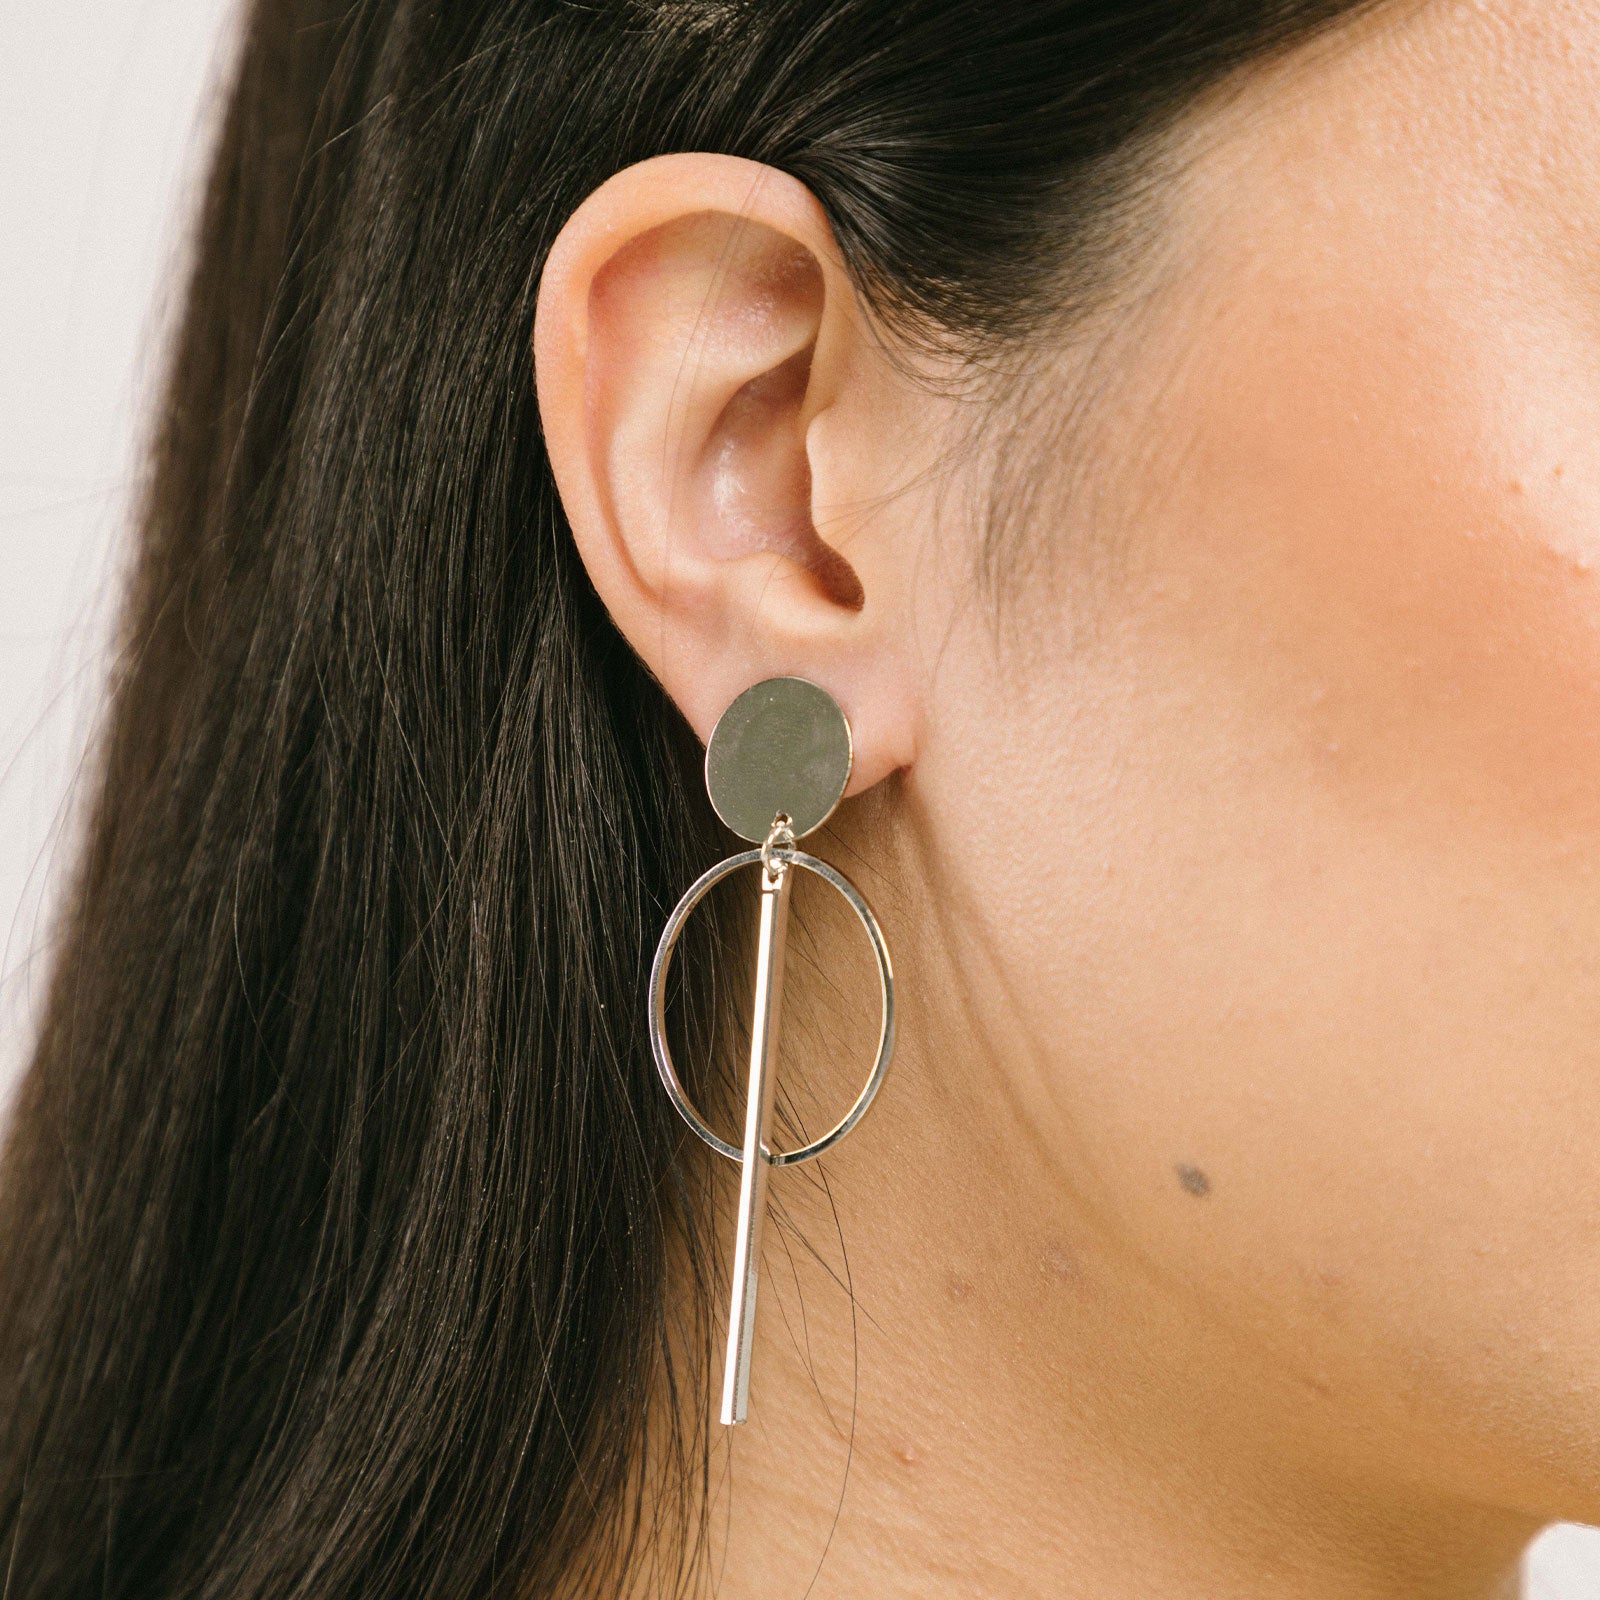 A model wearing the Melissa Clip-On Earrings offer a secure hold, with an average comfortable wear duration of 8-12 hours. The closure type is padded for a secure fit that accommodates all ear types, including thick/large ears, sensitive ears, small/thin ears, and stretched/healing ears. Constructed from gold tone/silver tone plated zinc alloy, each pair includes removable rubber padding.